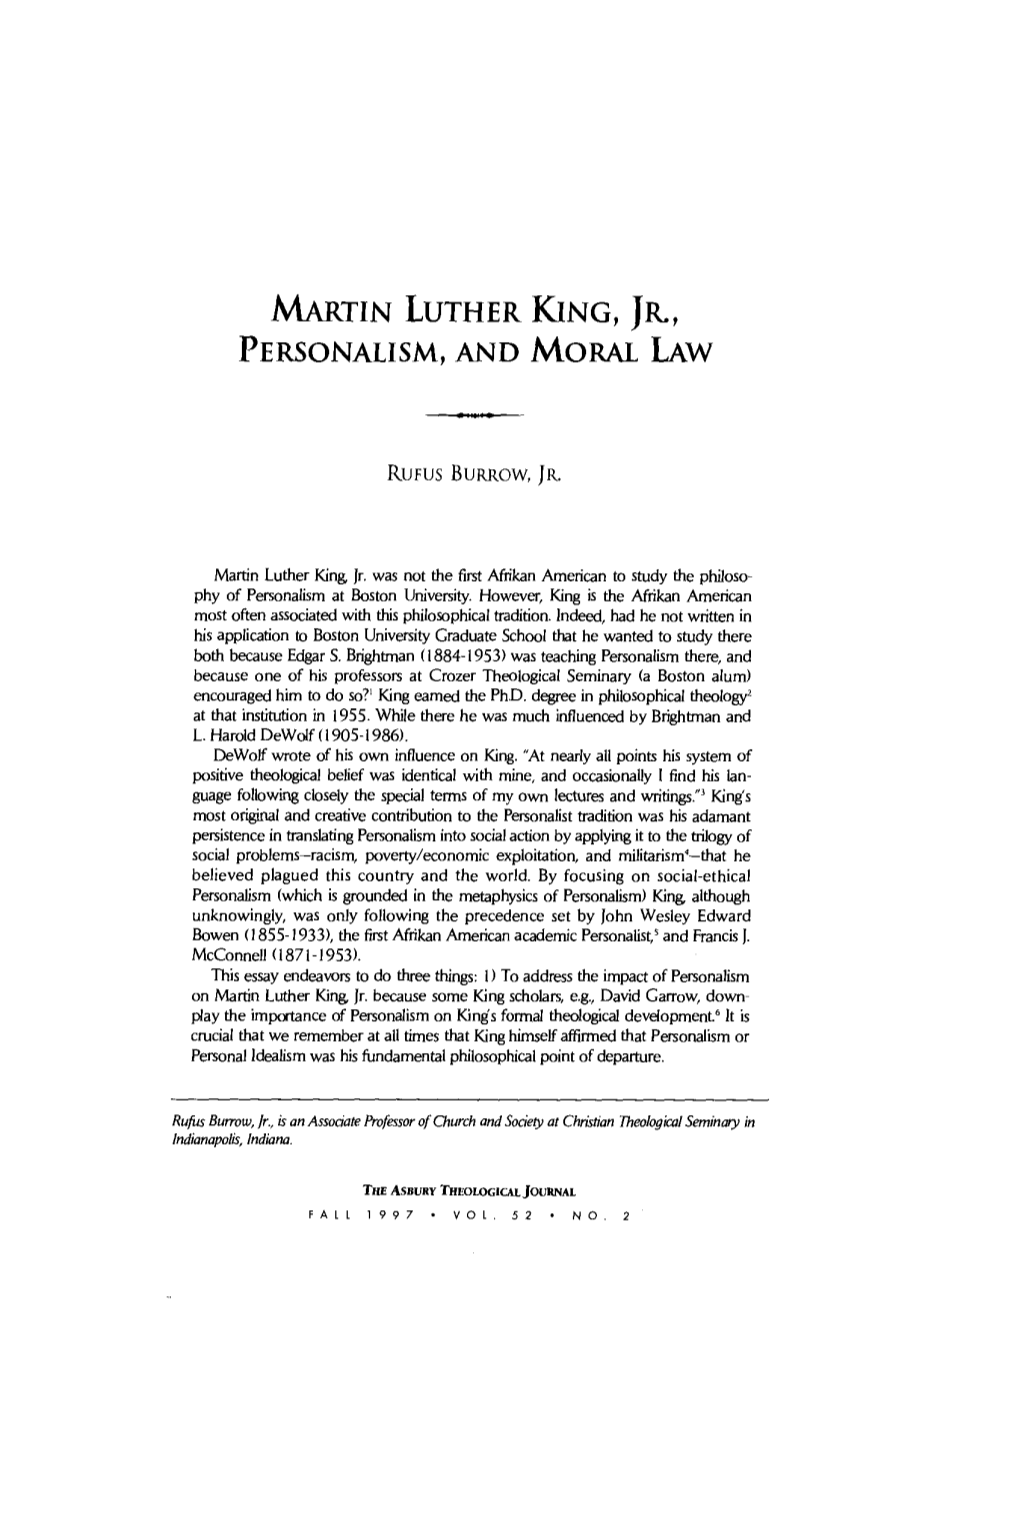 Martin Luther King, Jr., Personalism, and Moral Law